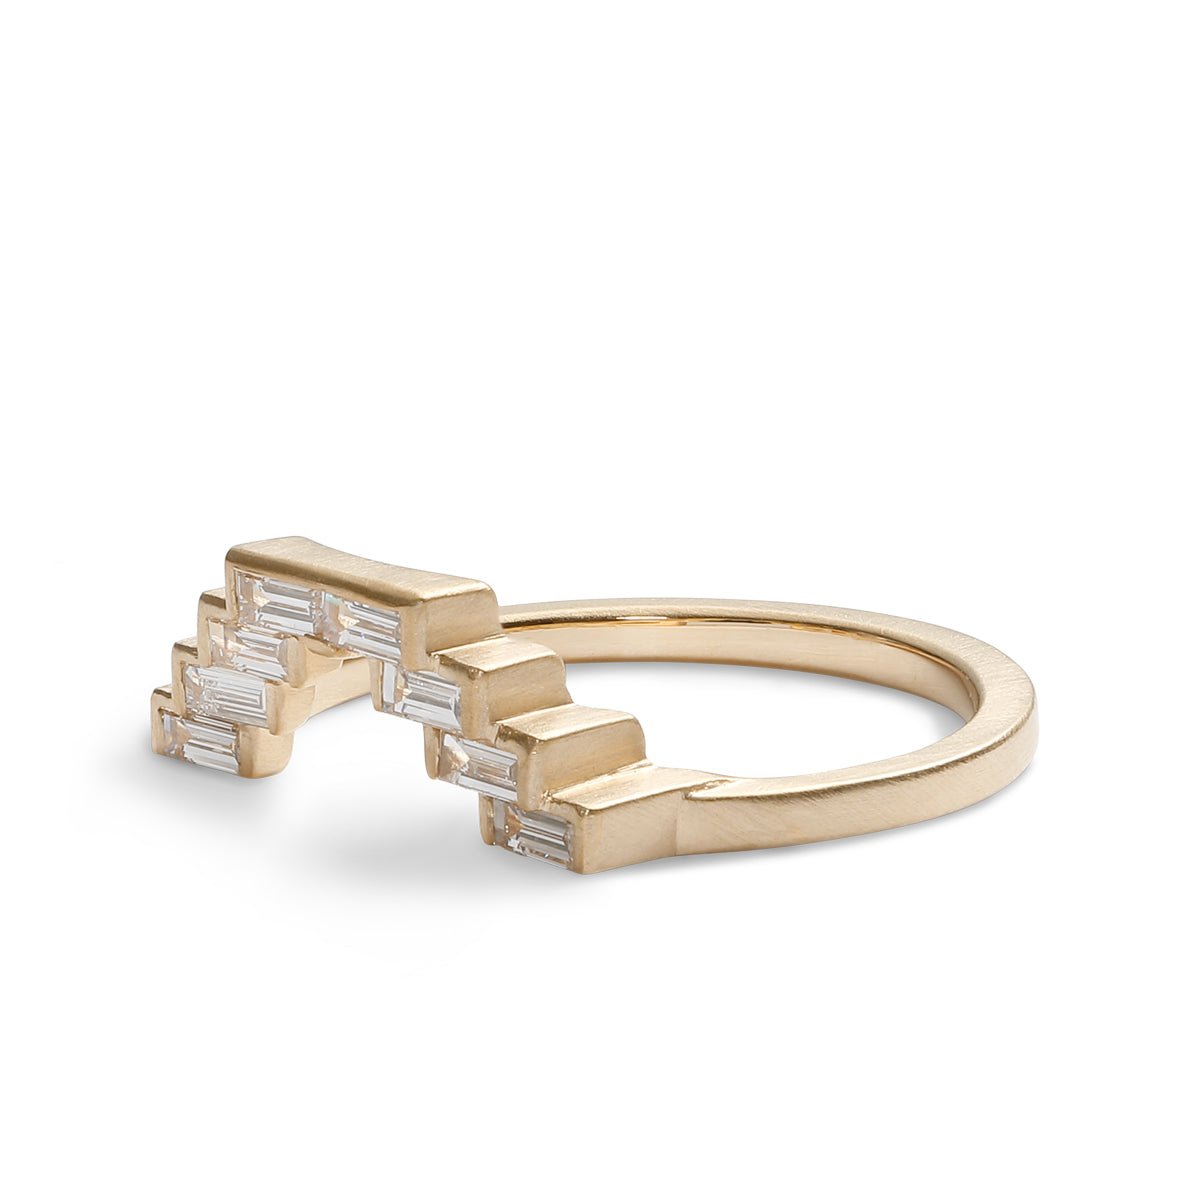 V-shaped geometric Montis stacking ring. Features lab-grown baguette diamonds and 14K recycled gold.